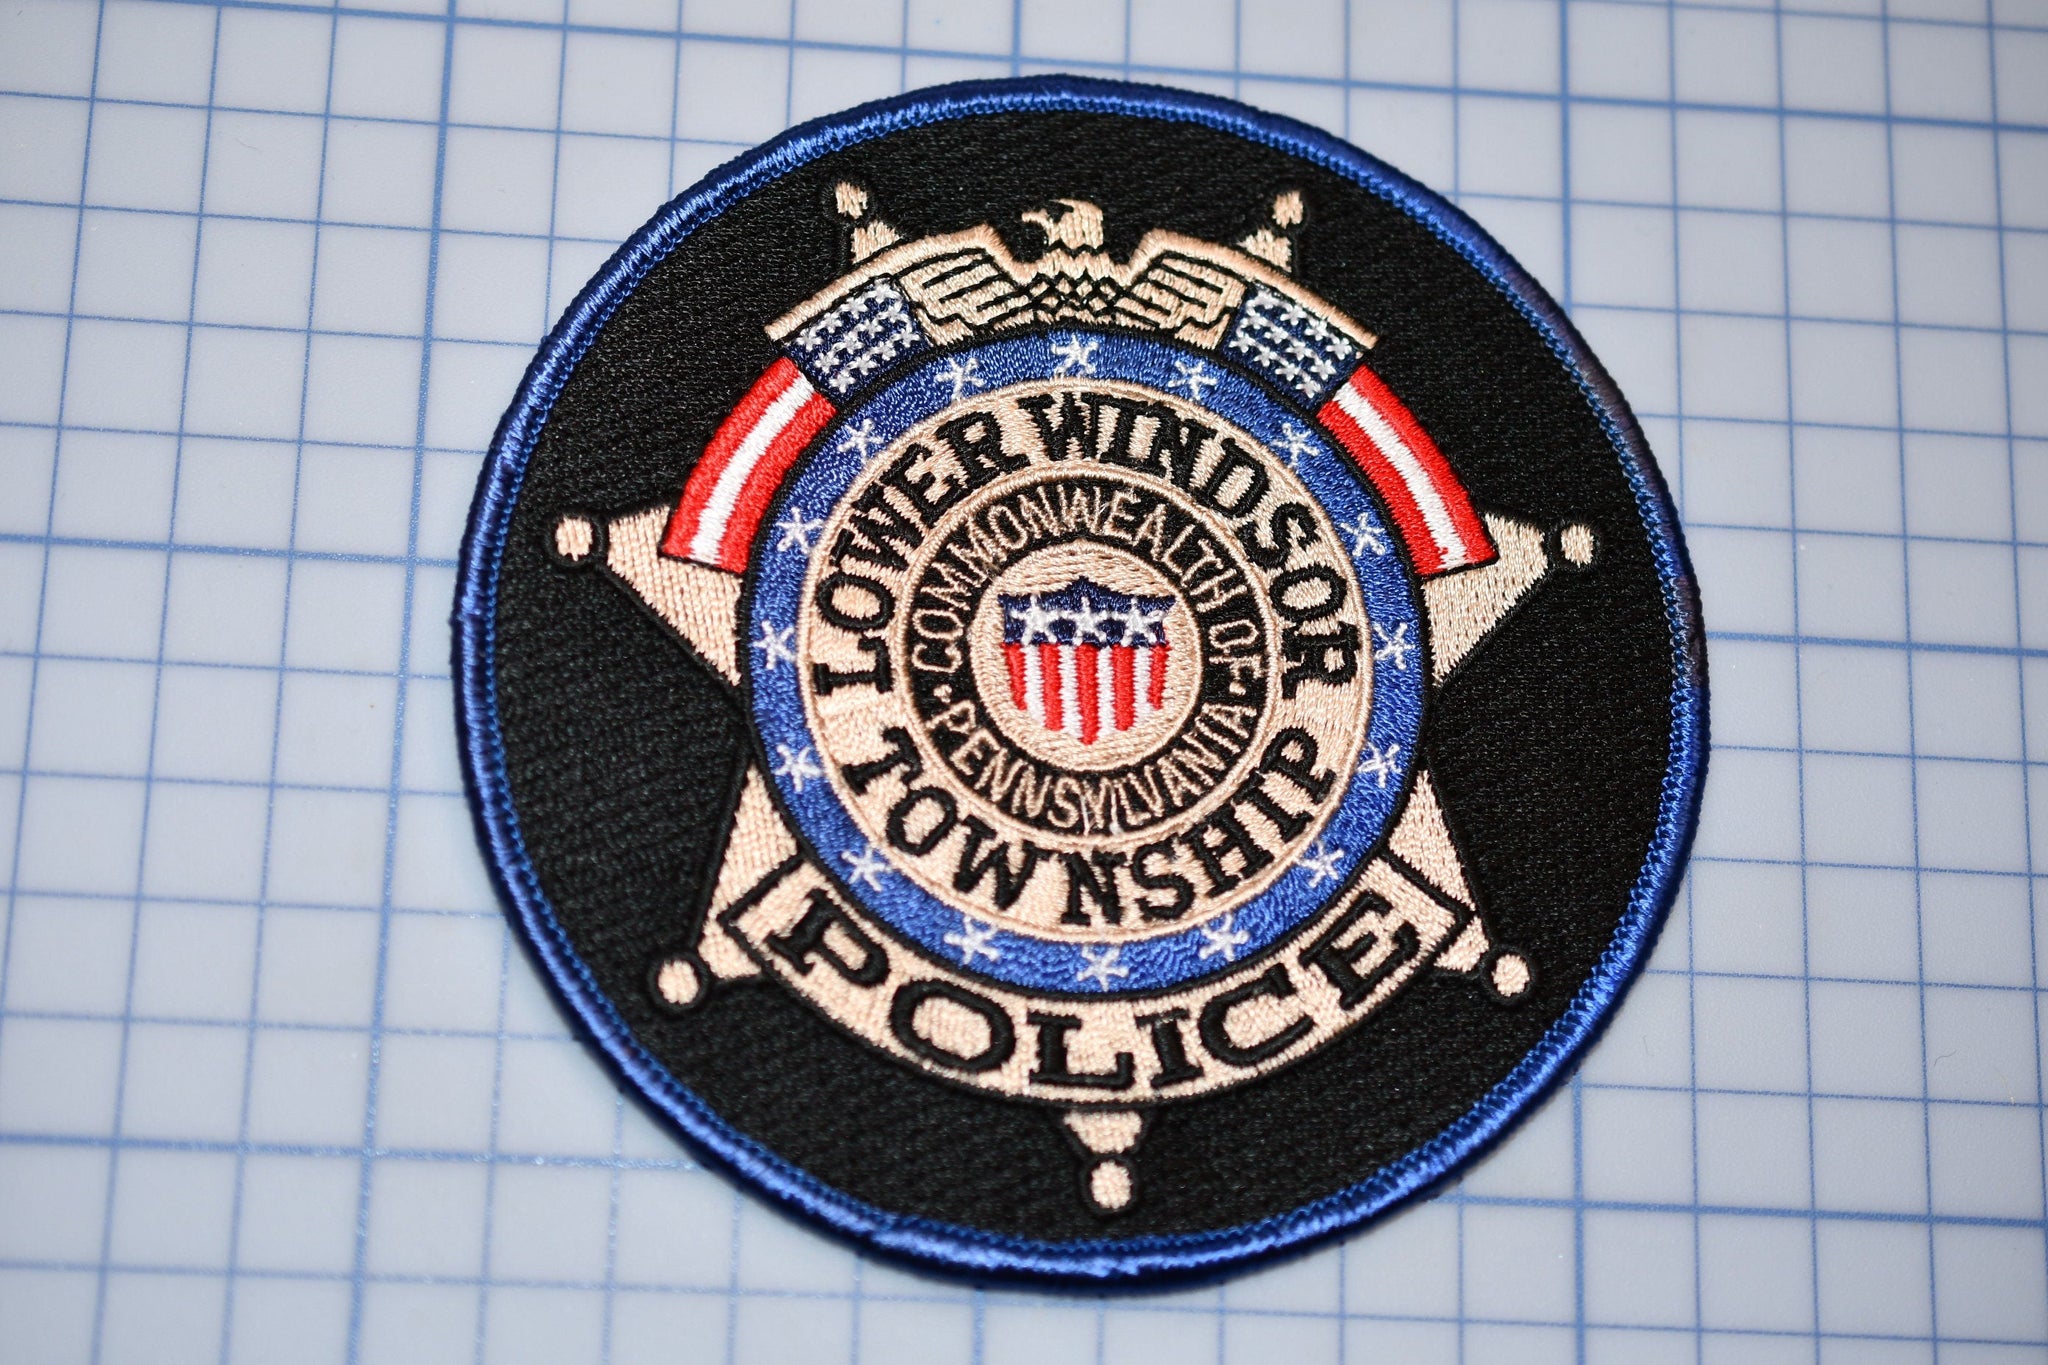 Lower Windsor Township Pennsylvania Police Patch (B23-336)